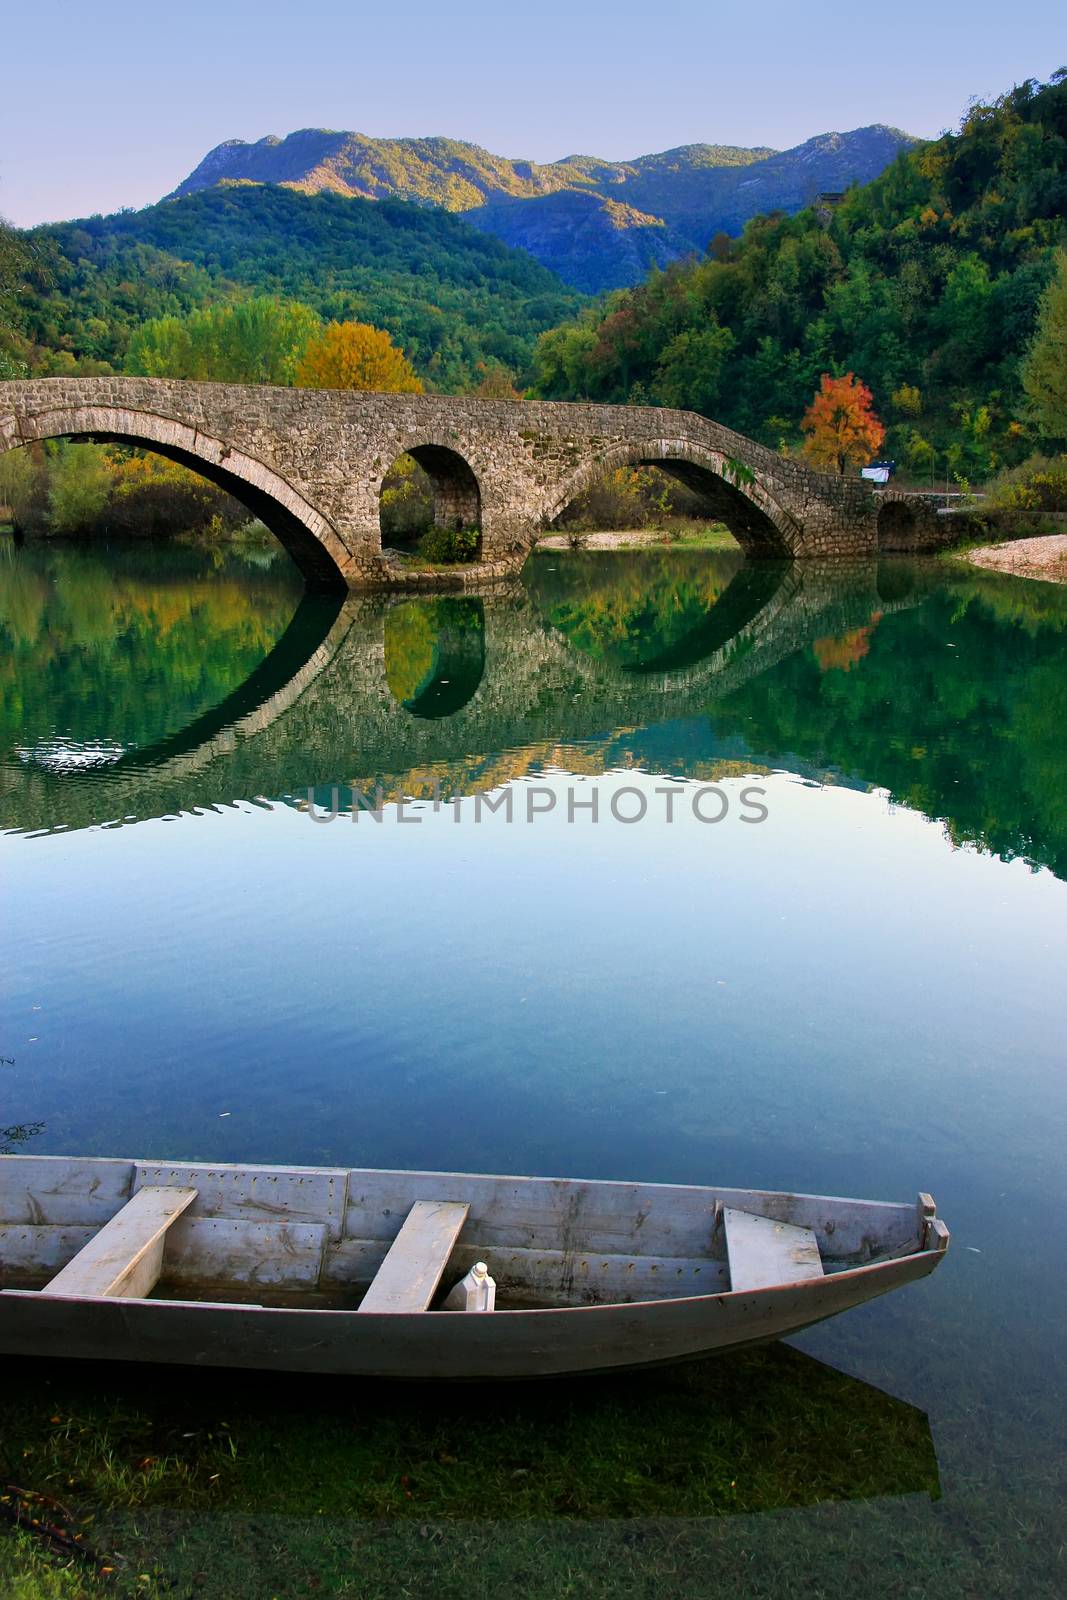 Arched bridge reflected in Crnojevica river, Montenegro by donya_nedomam